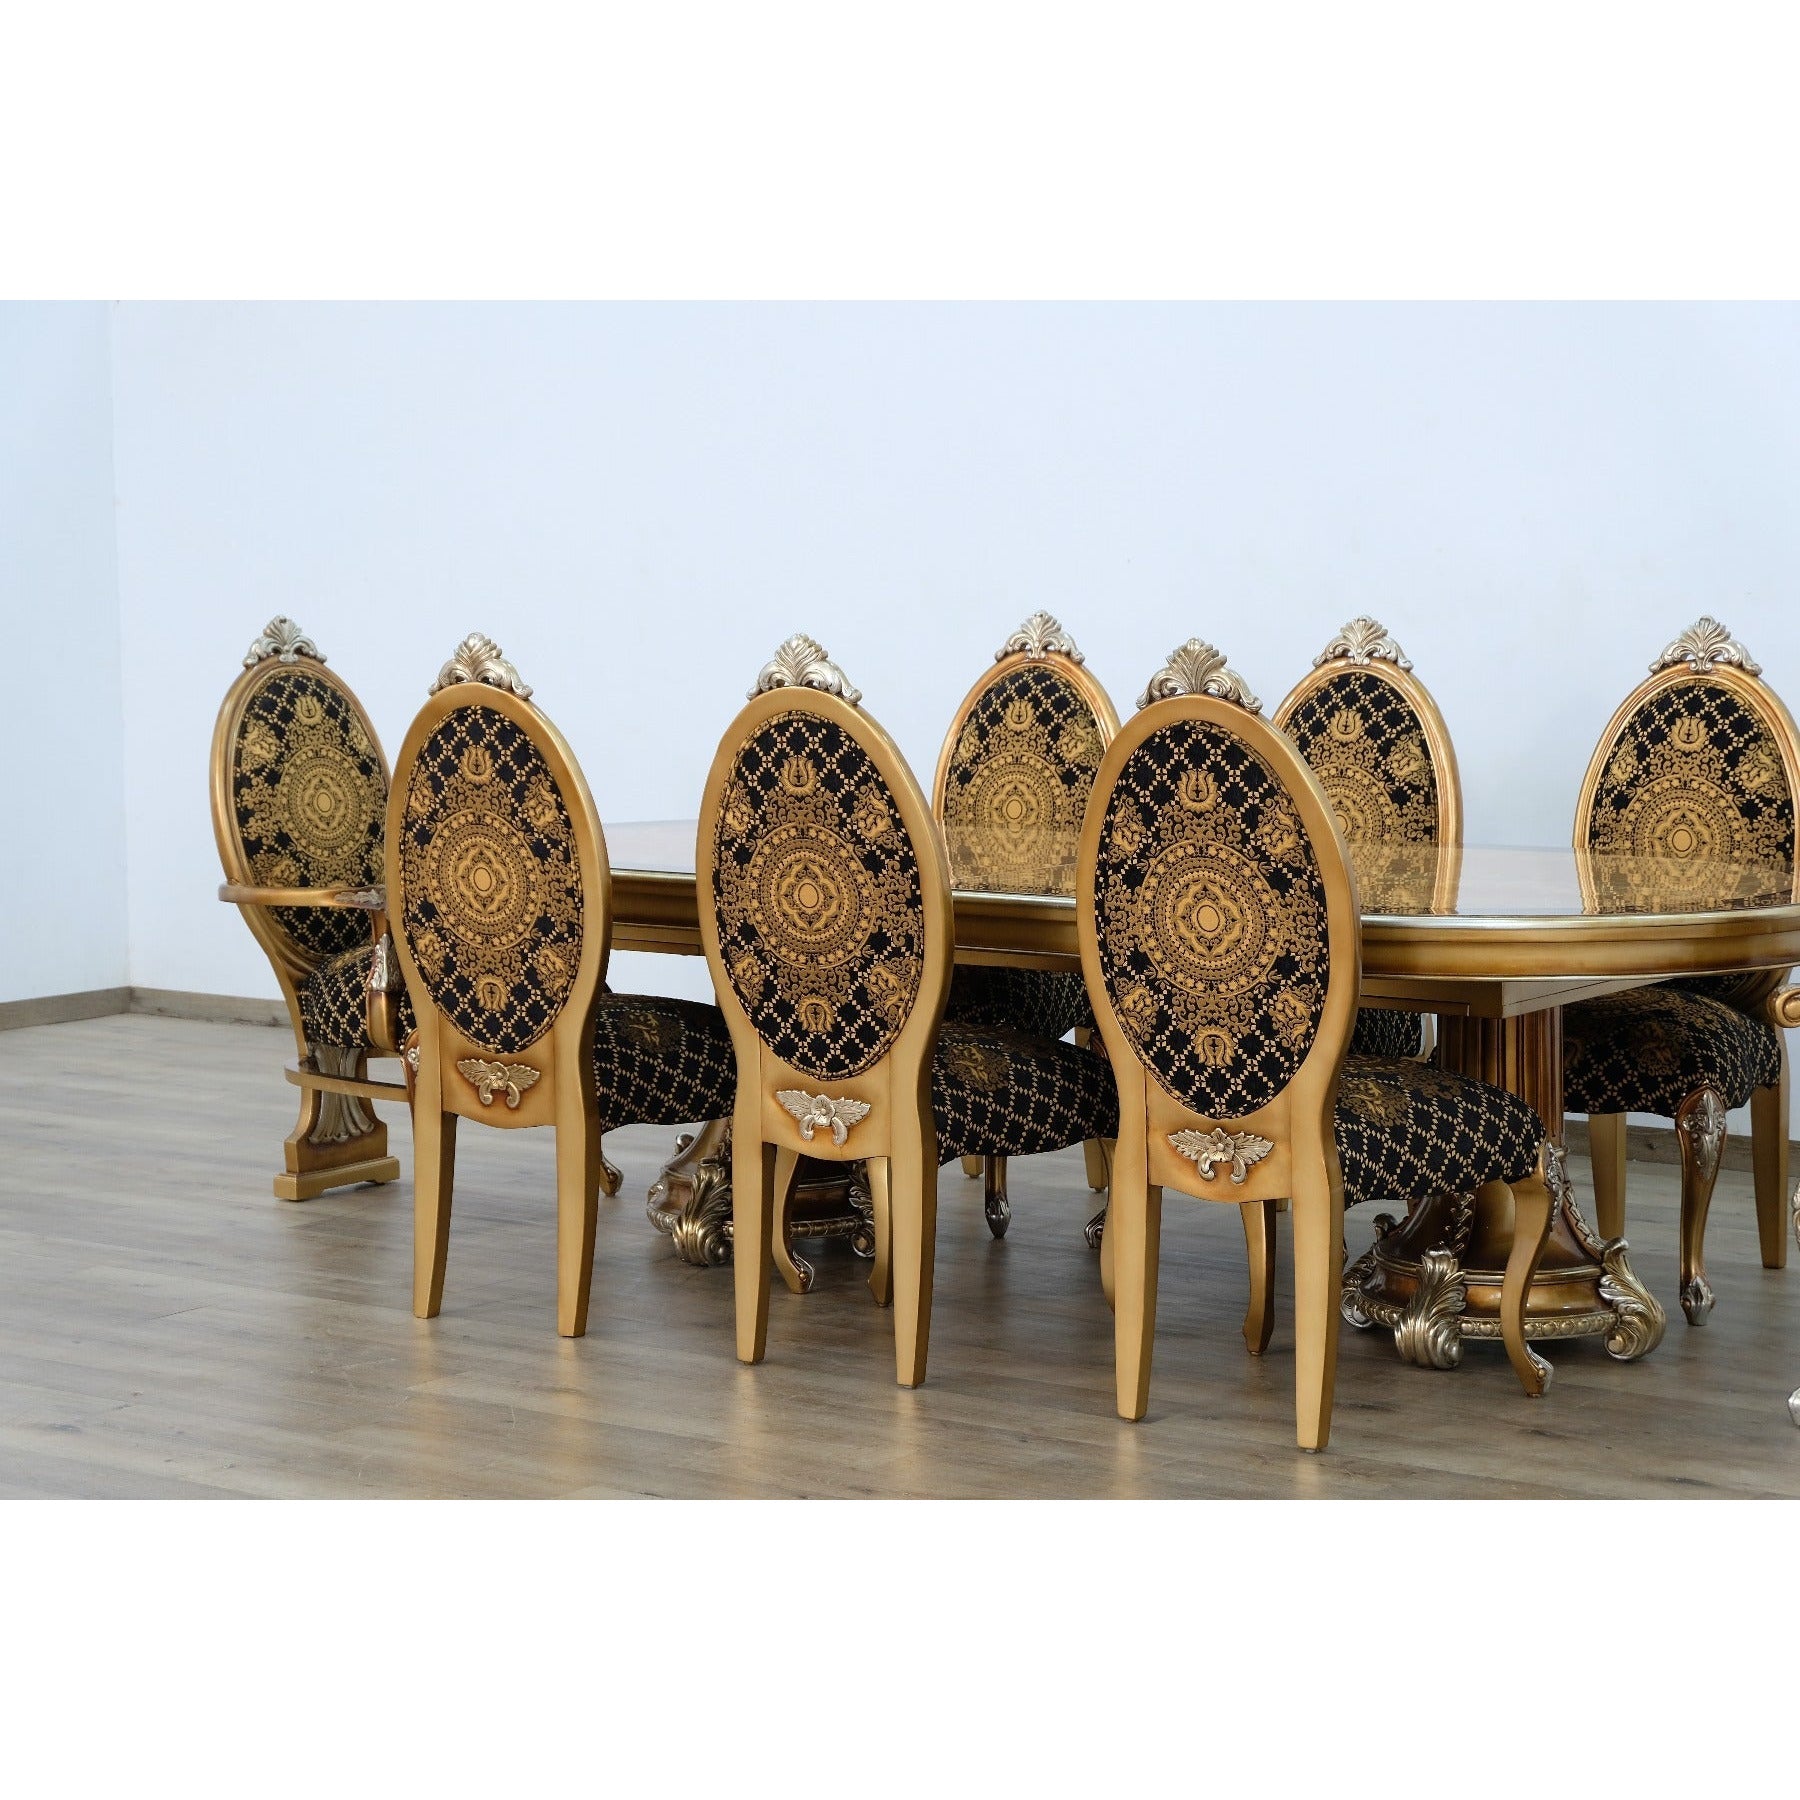 European Furniture - Emperador Arm Chair Set of 2 in Black and Gold - 42034-AC - New Star Living